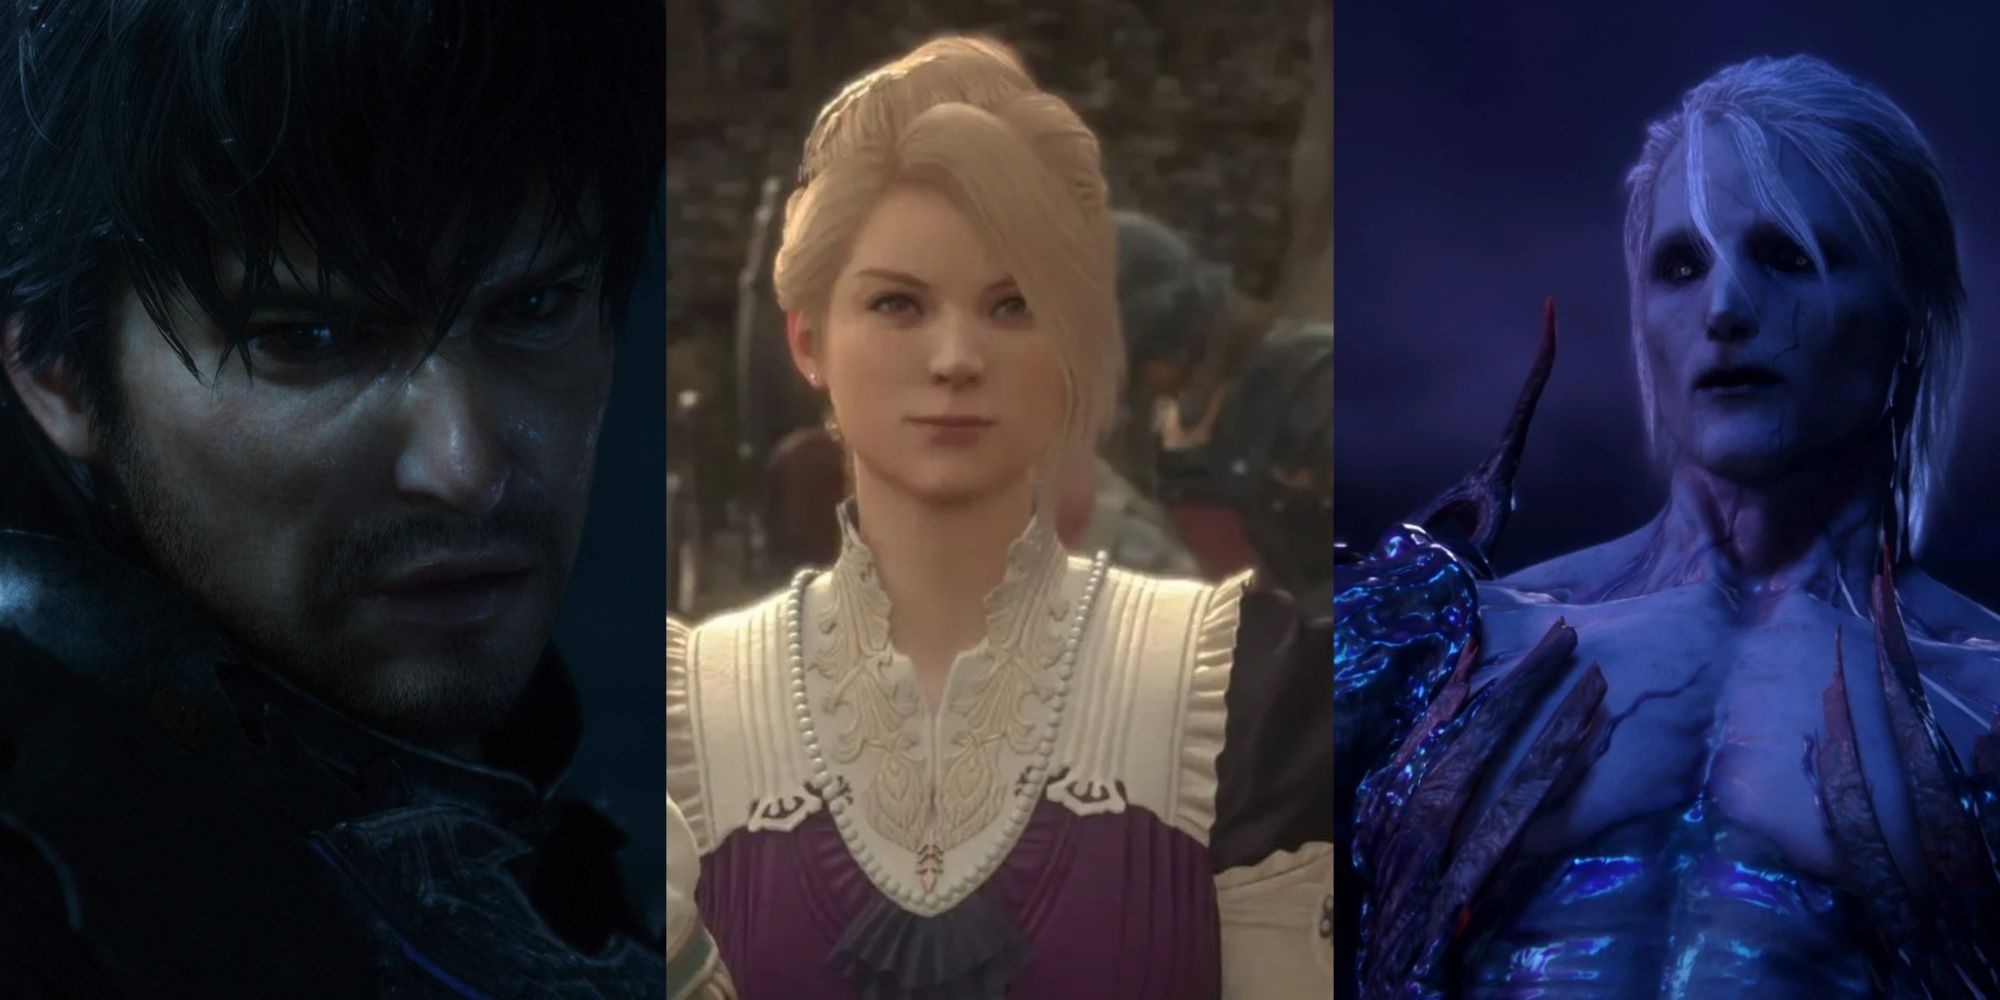 Barnabas, Anabella and Ultima are among the villains in FF16